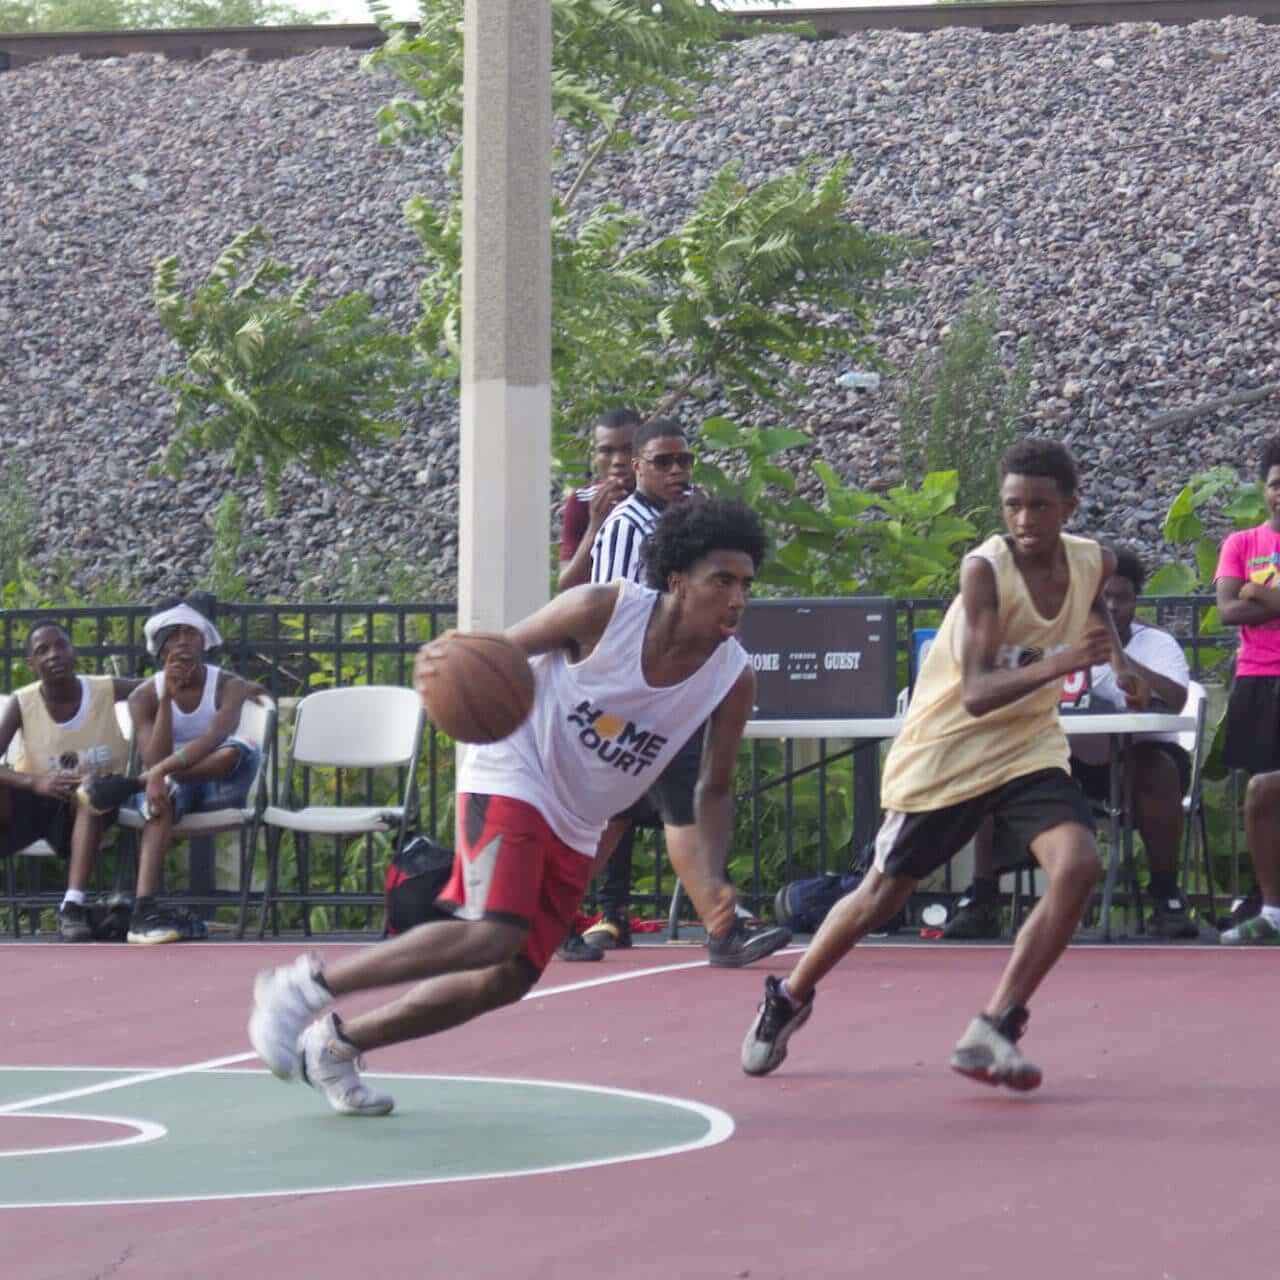 youth playing basketball at outdoor court